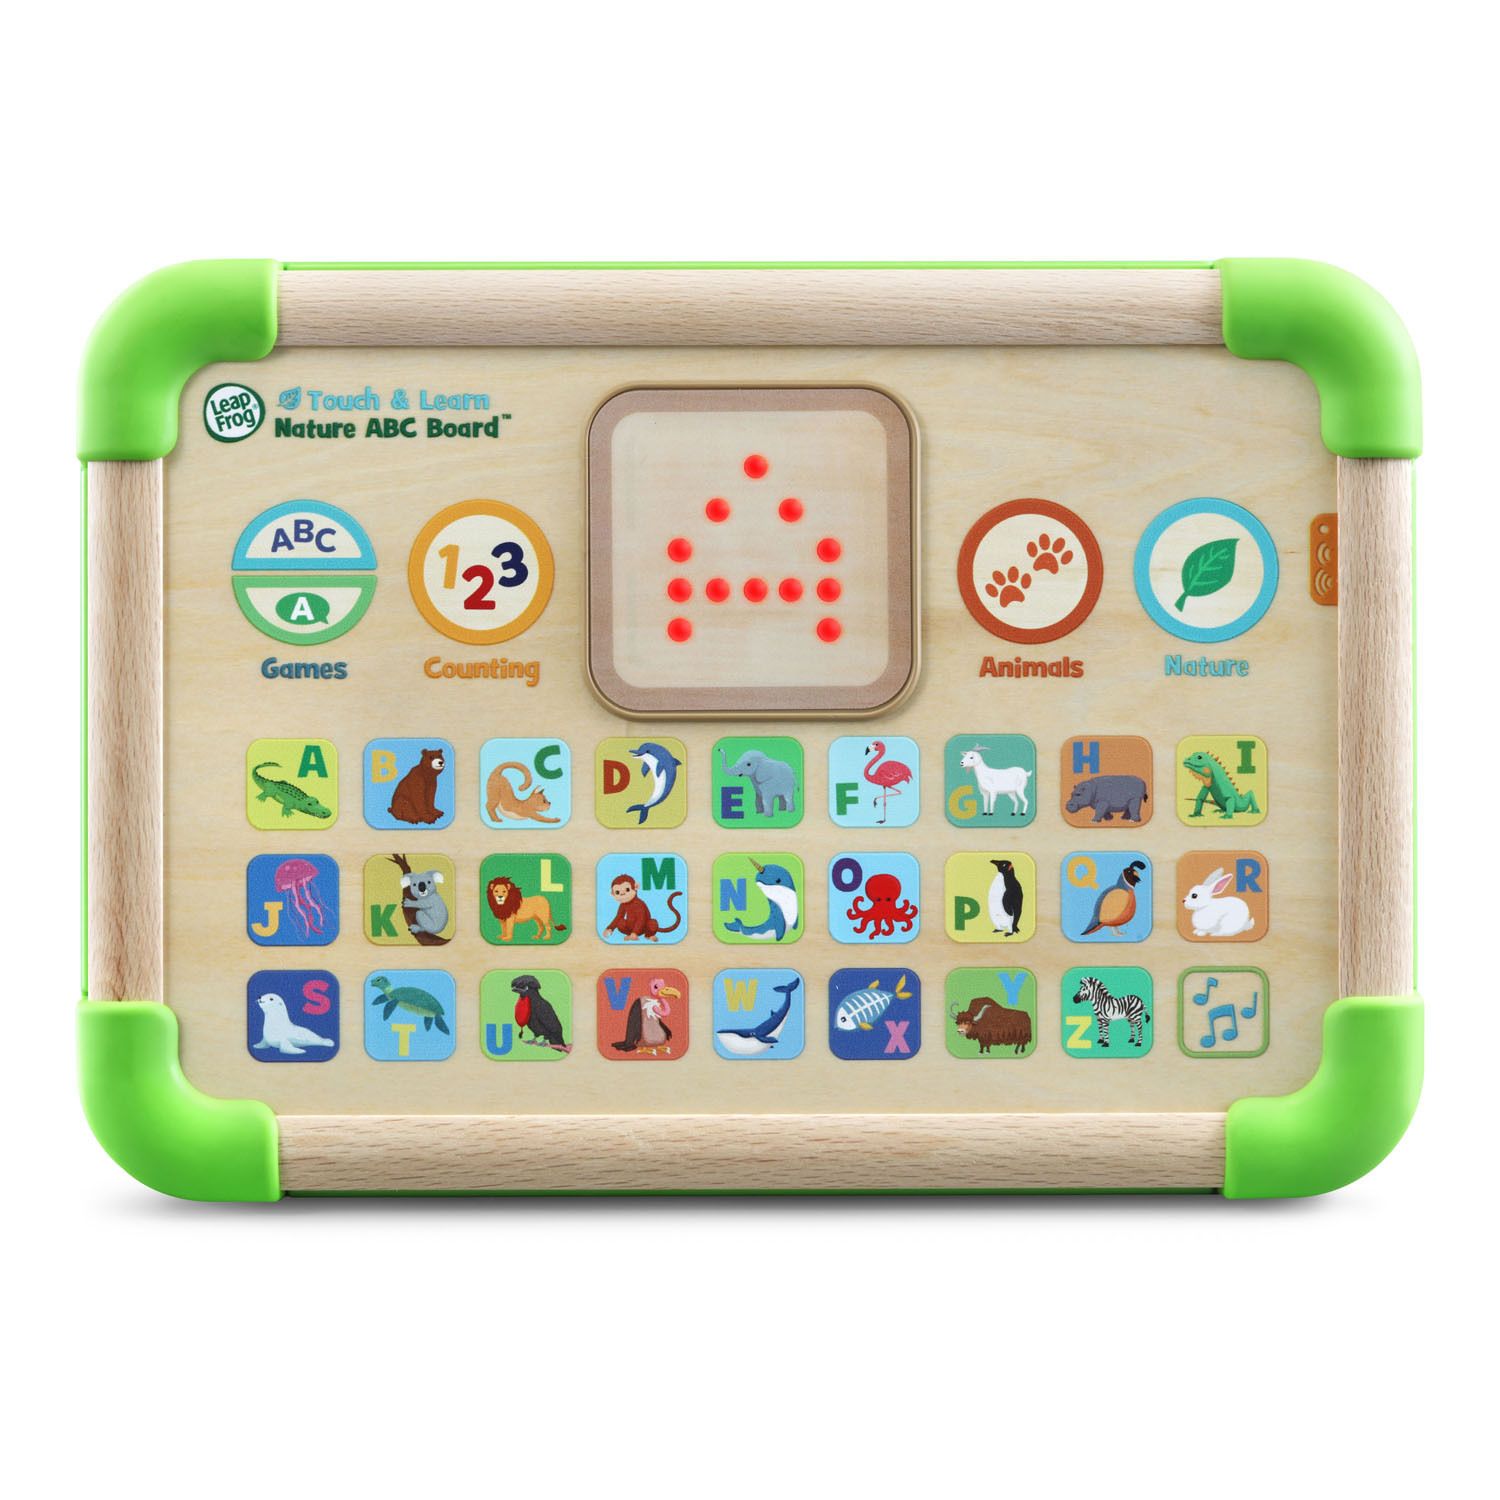 Image for LeapFrog Nature ABC Touch and Learn Board Educational Toy at Kohl's.